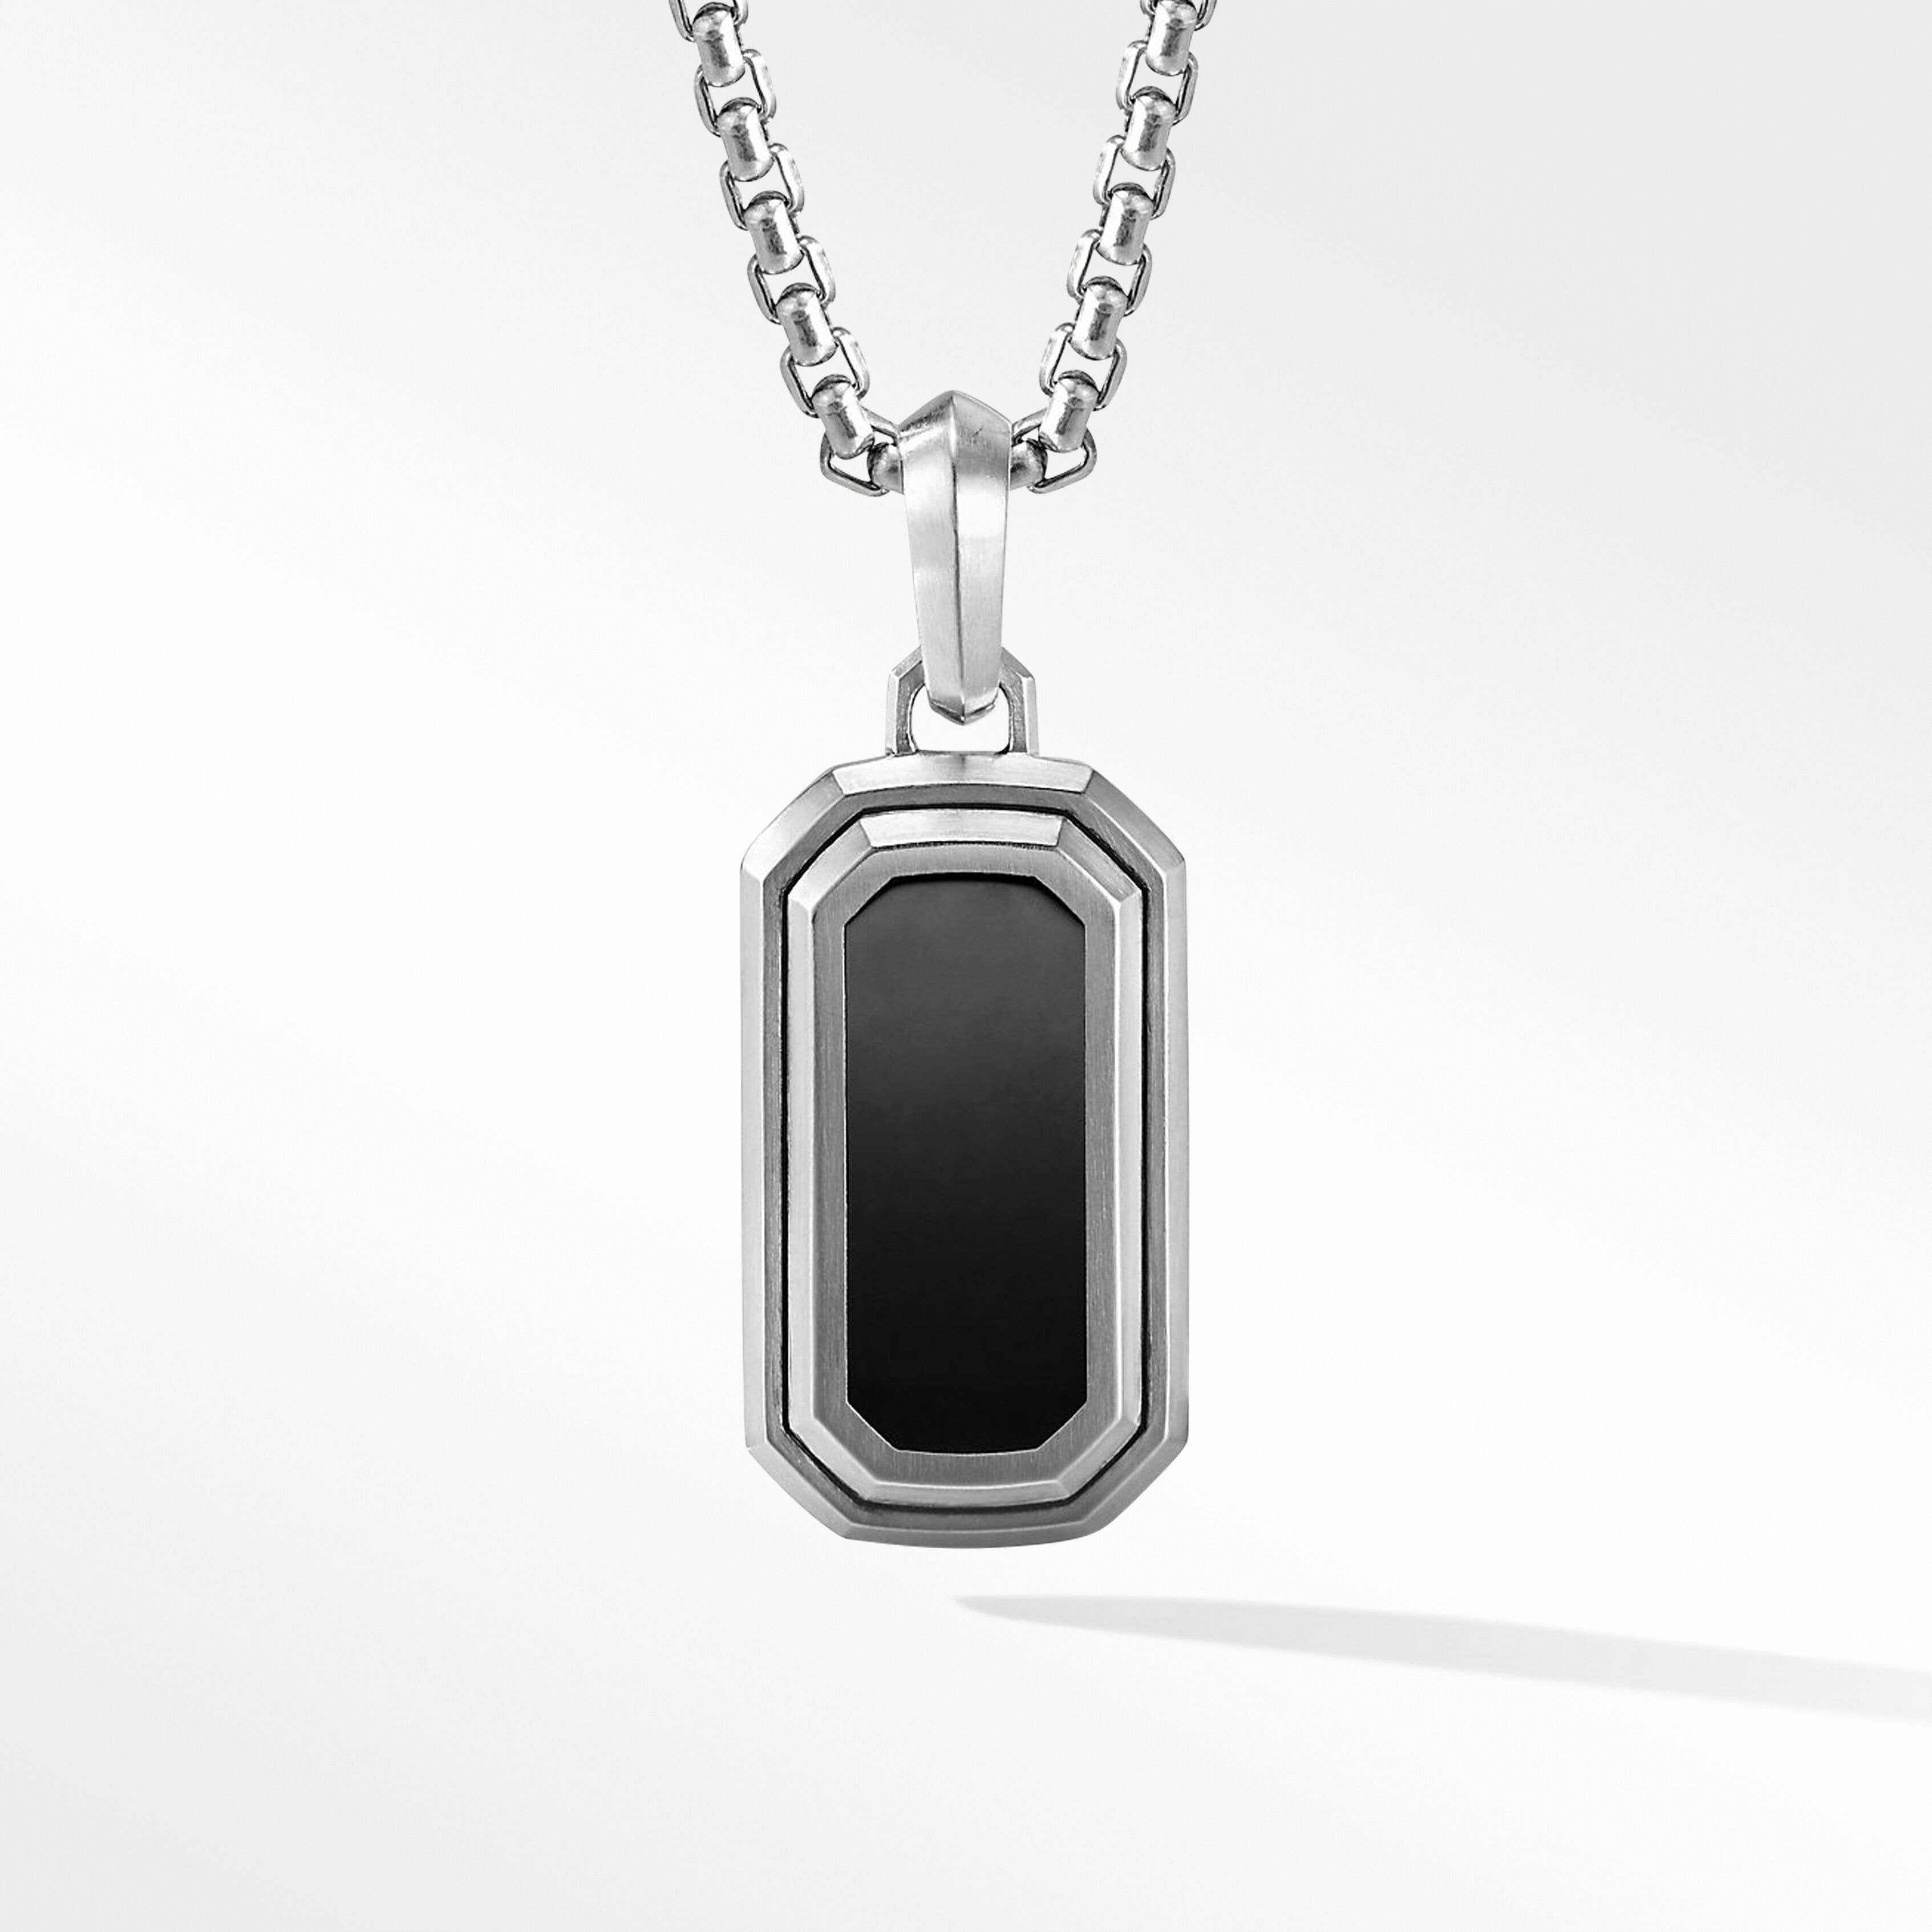 Deco Amulet in Sterling Silver with Black Onyx